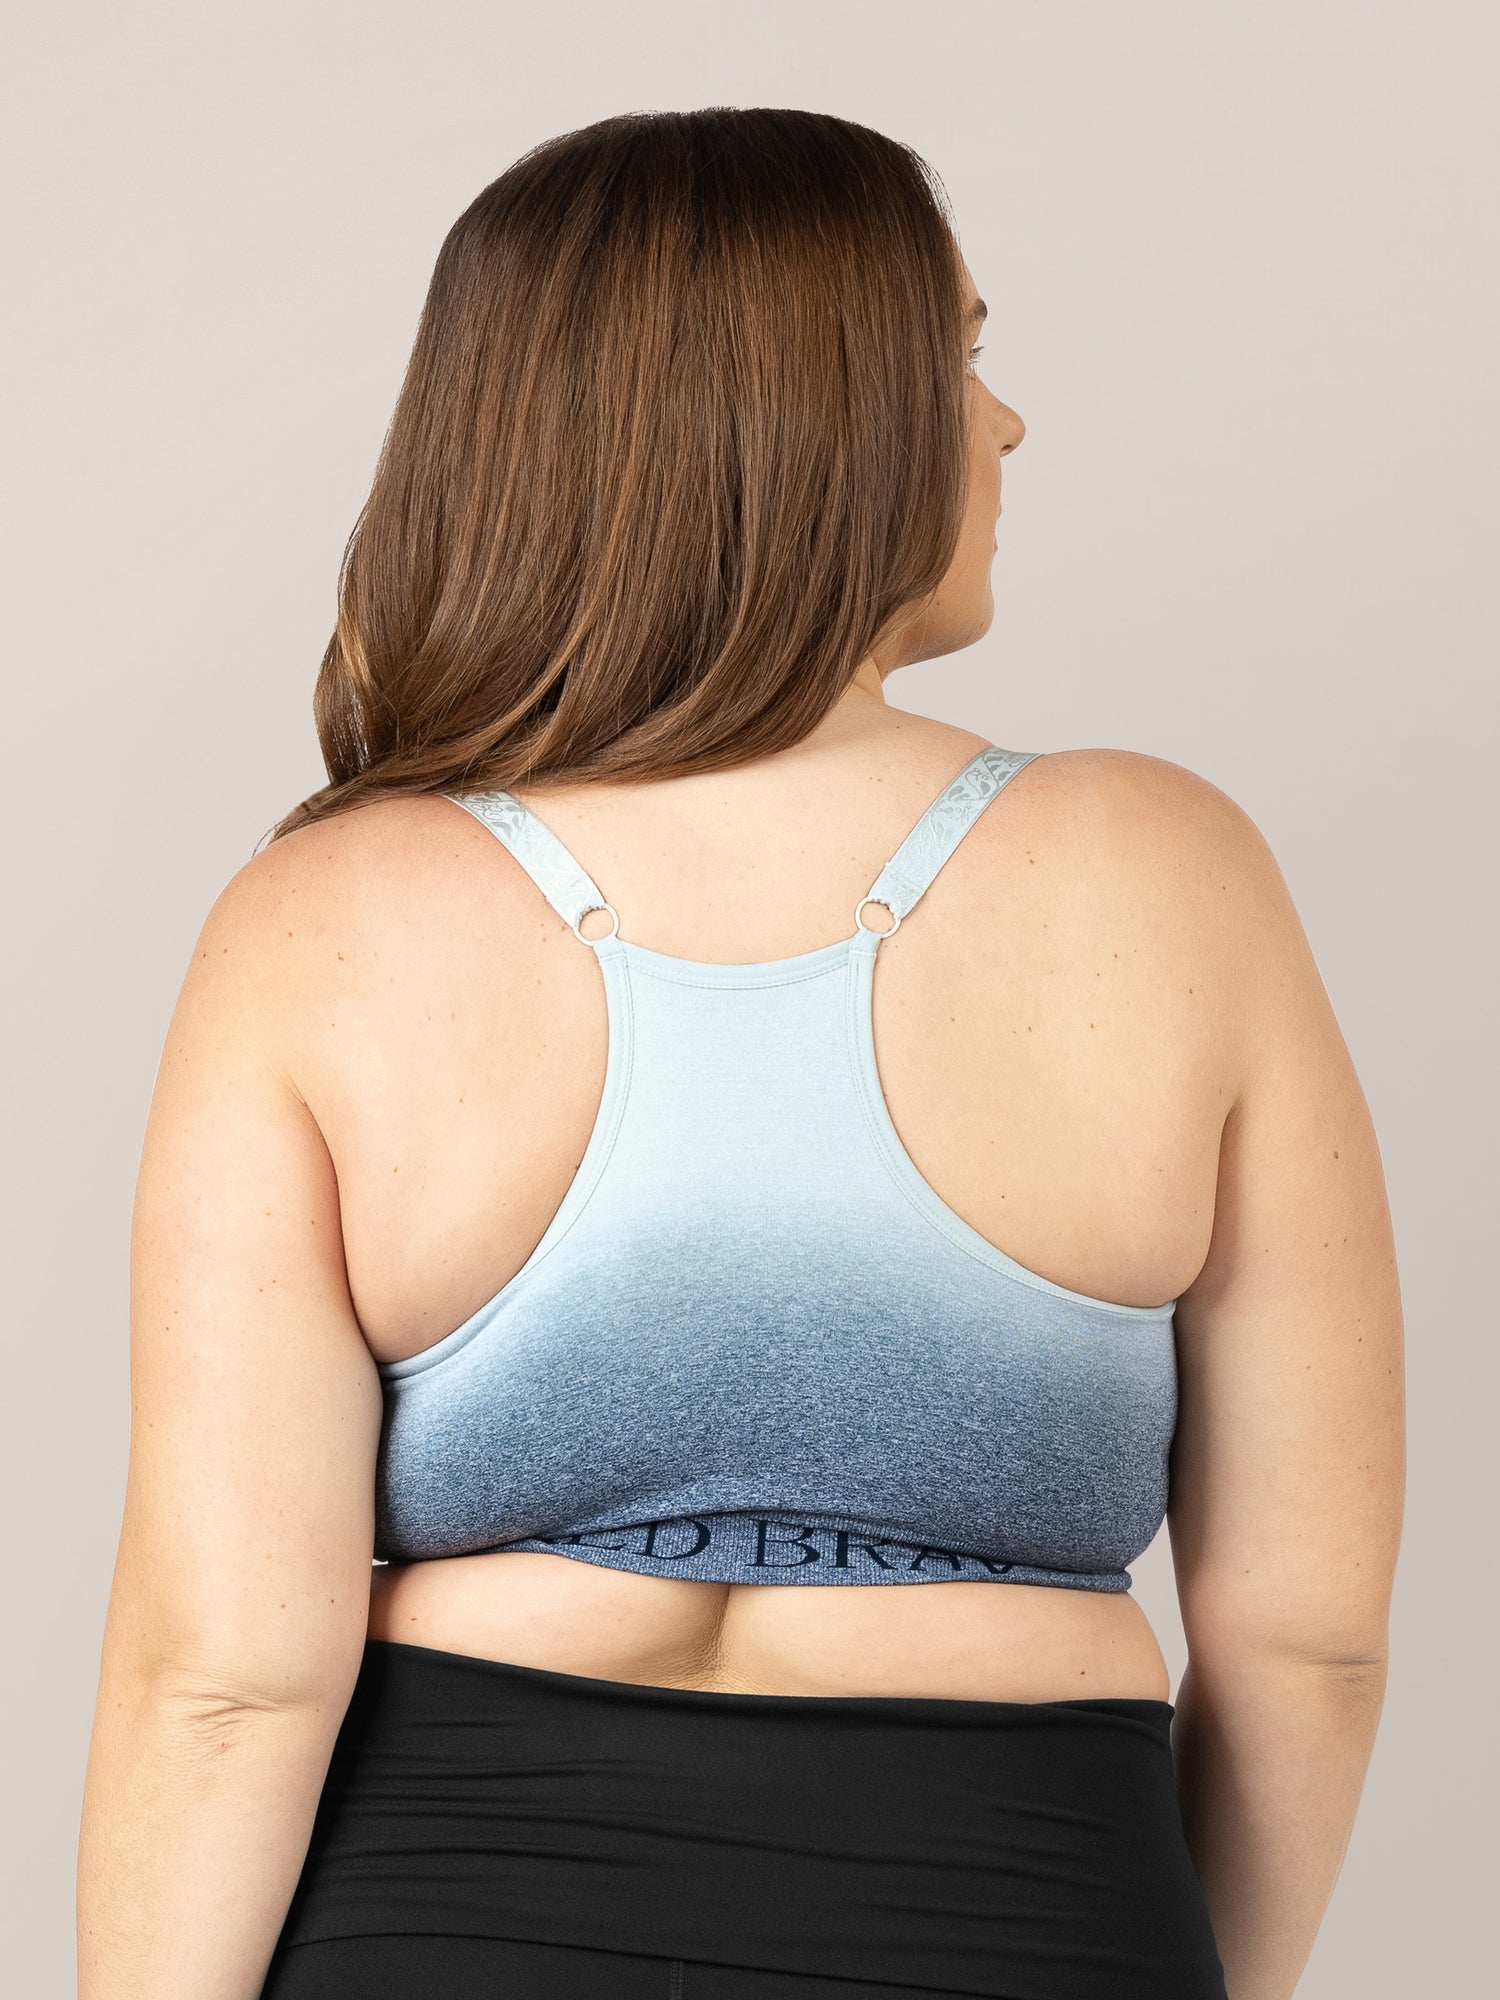  Kindred Bravely Sublime Busty Low Impact Nursing & Maternity  Sports Bra For F, G, H, I Cup